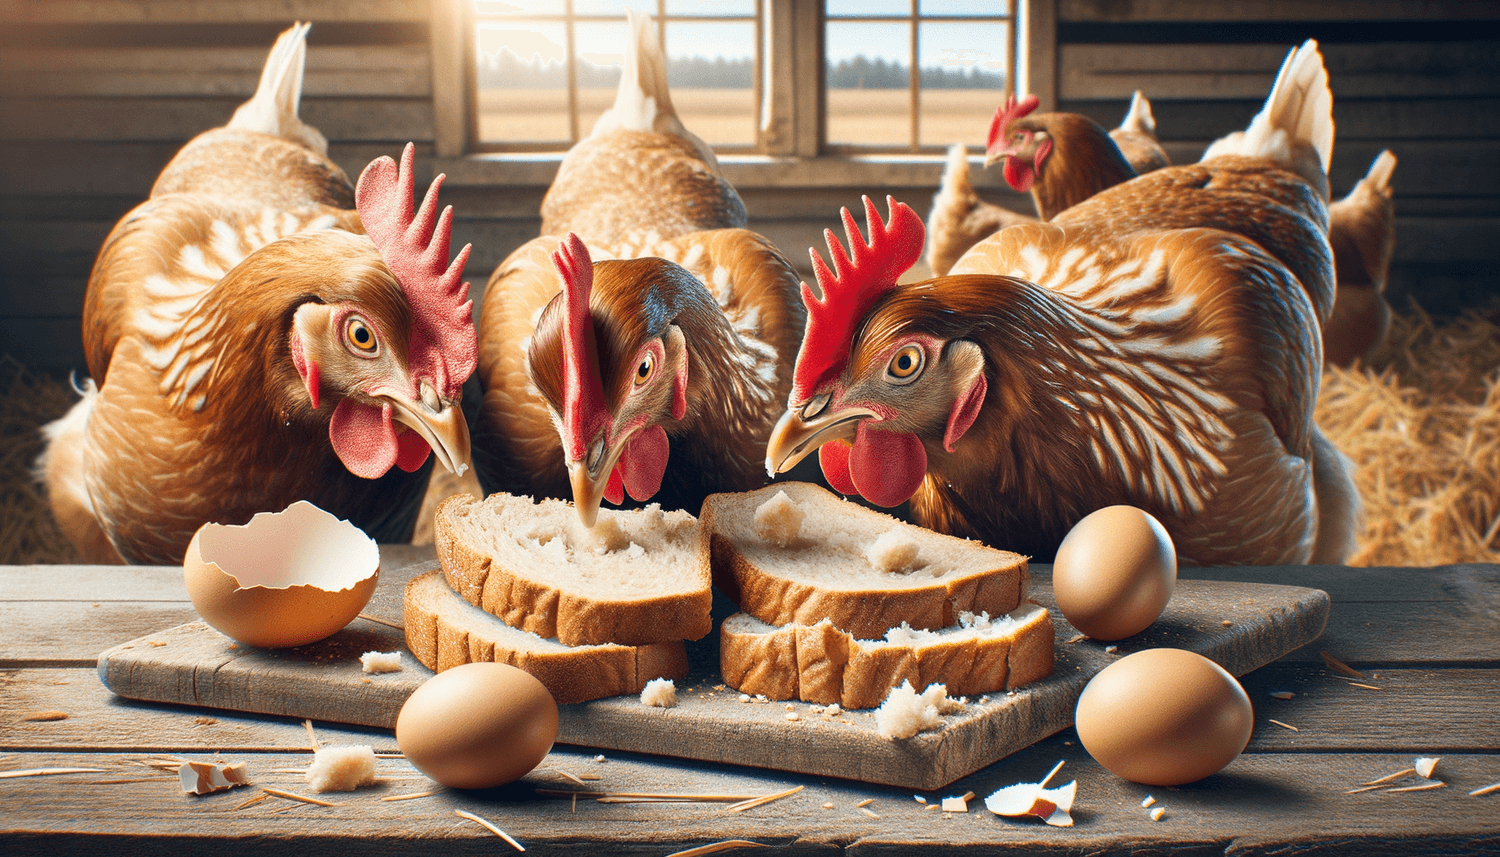 Can Chickens Eat Old Bread?